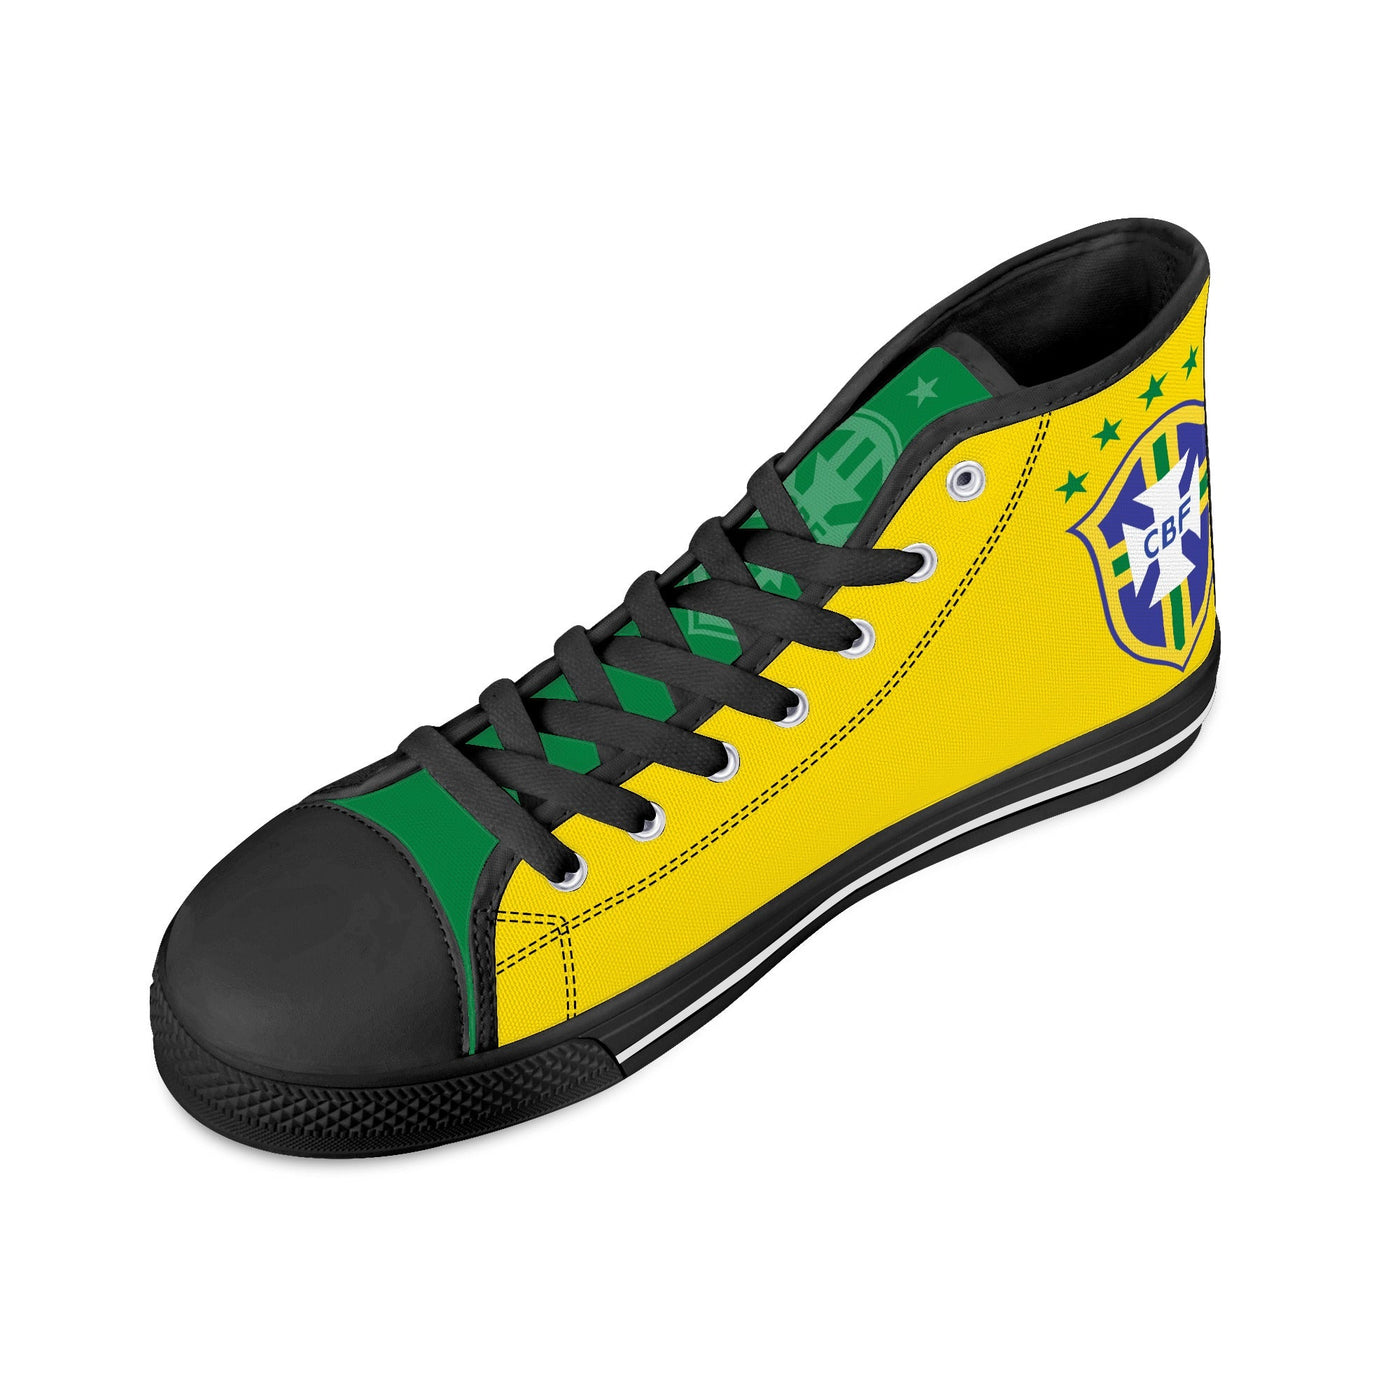 Brazil National Soccer Team Shoes | High Top Canvas Sneakers